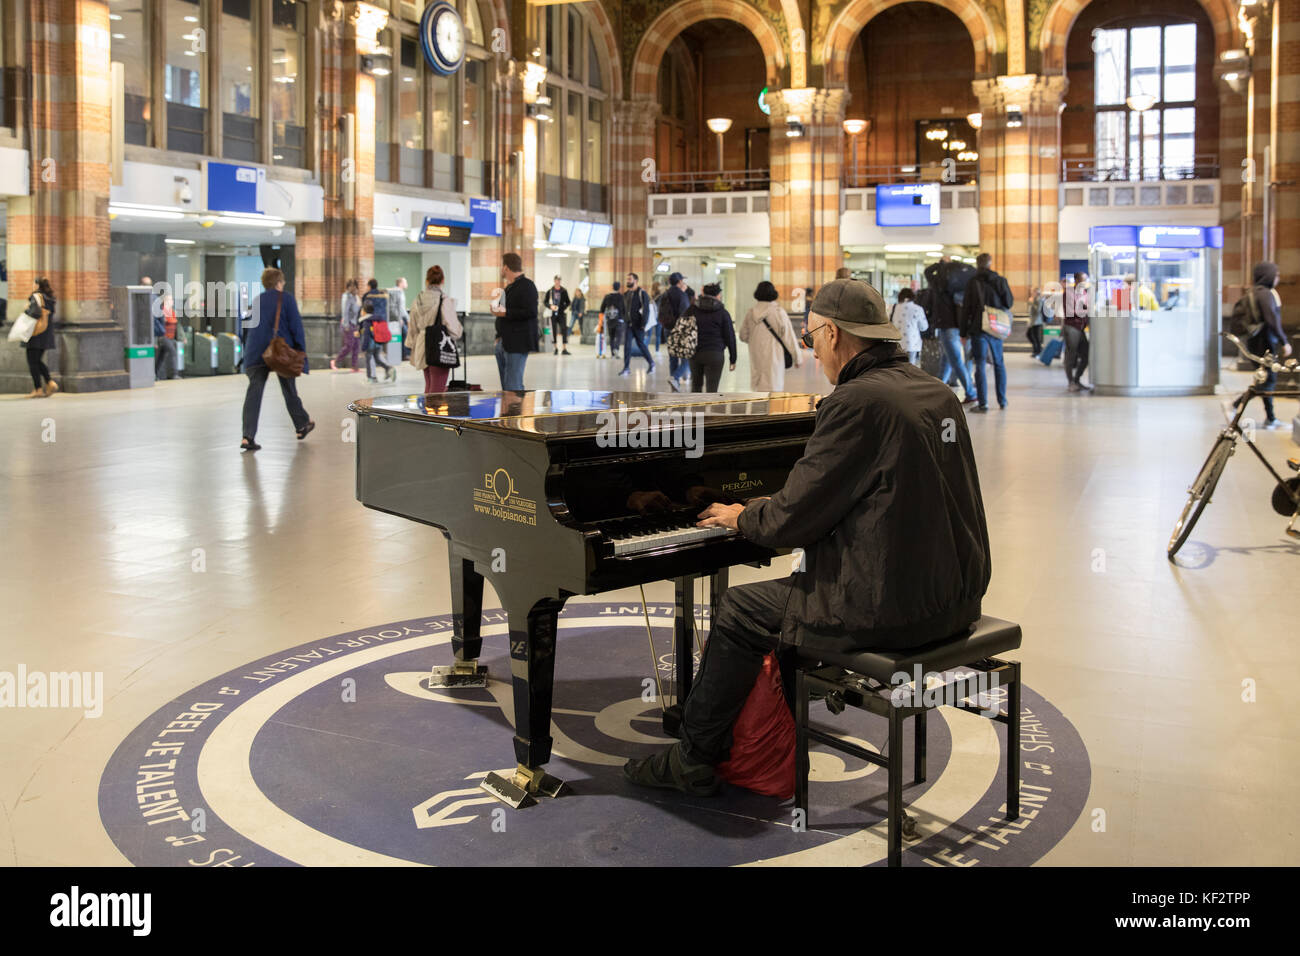 The public piano in Central station, Amsterdam, Netherlands Stock Photo